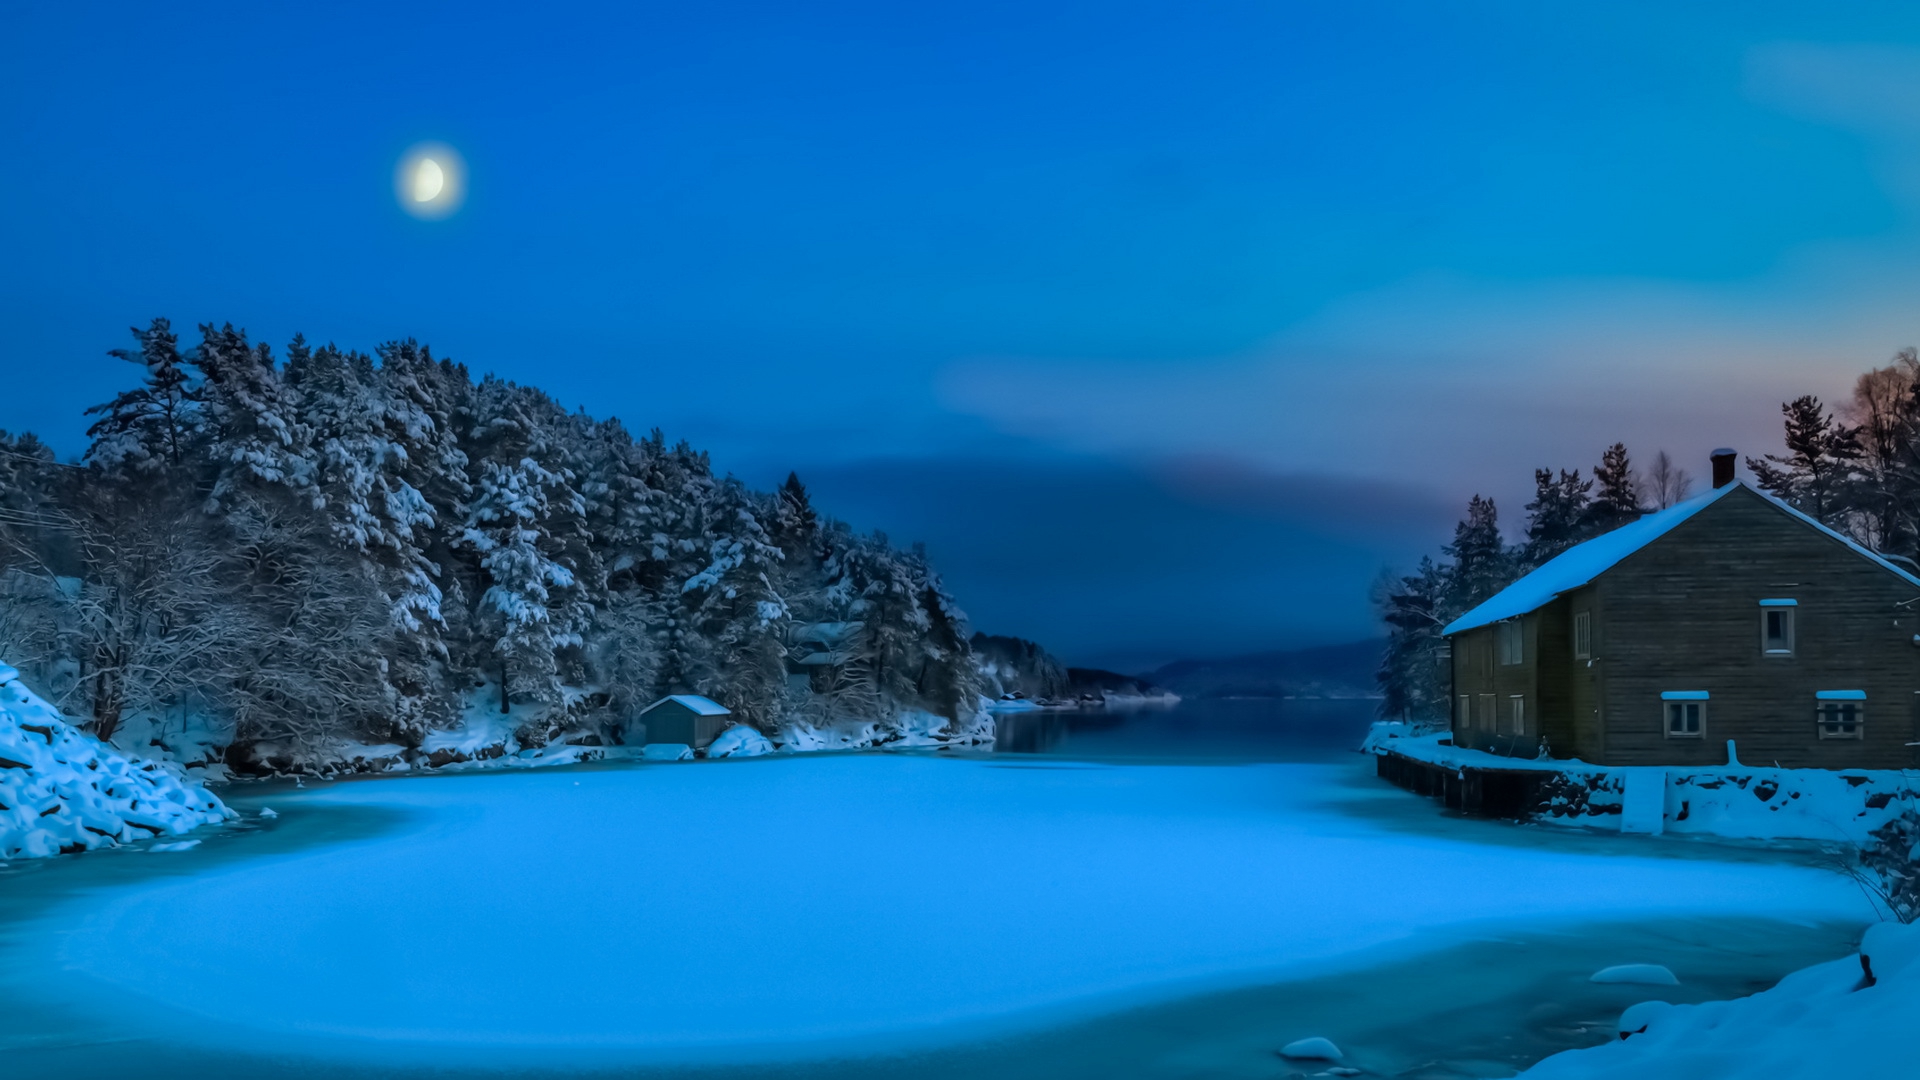 Download PC Wallpaper night, man made, house, bay, moon, norway, snow, tree, winter